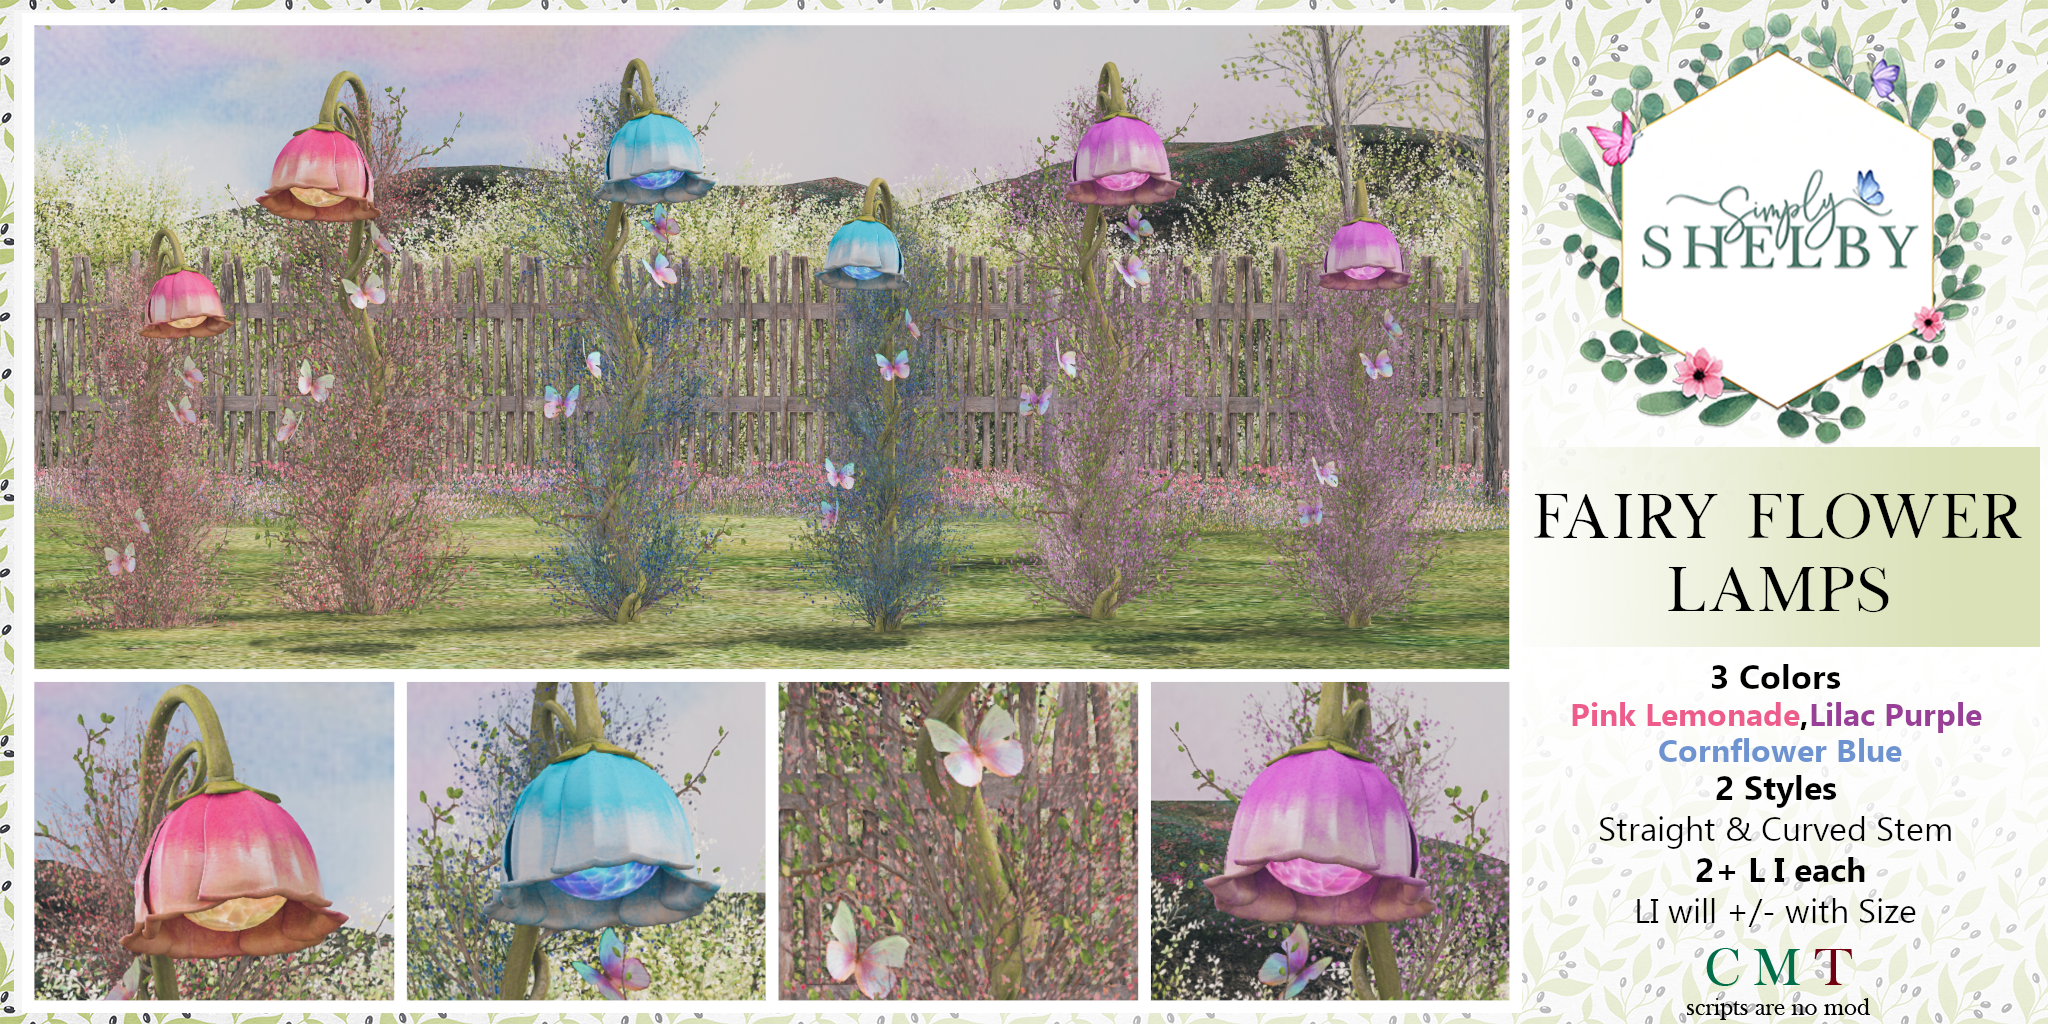 Simply Shelby – Fairy Flower Lamps